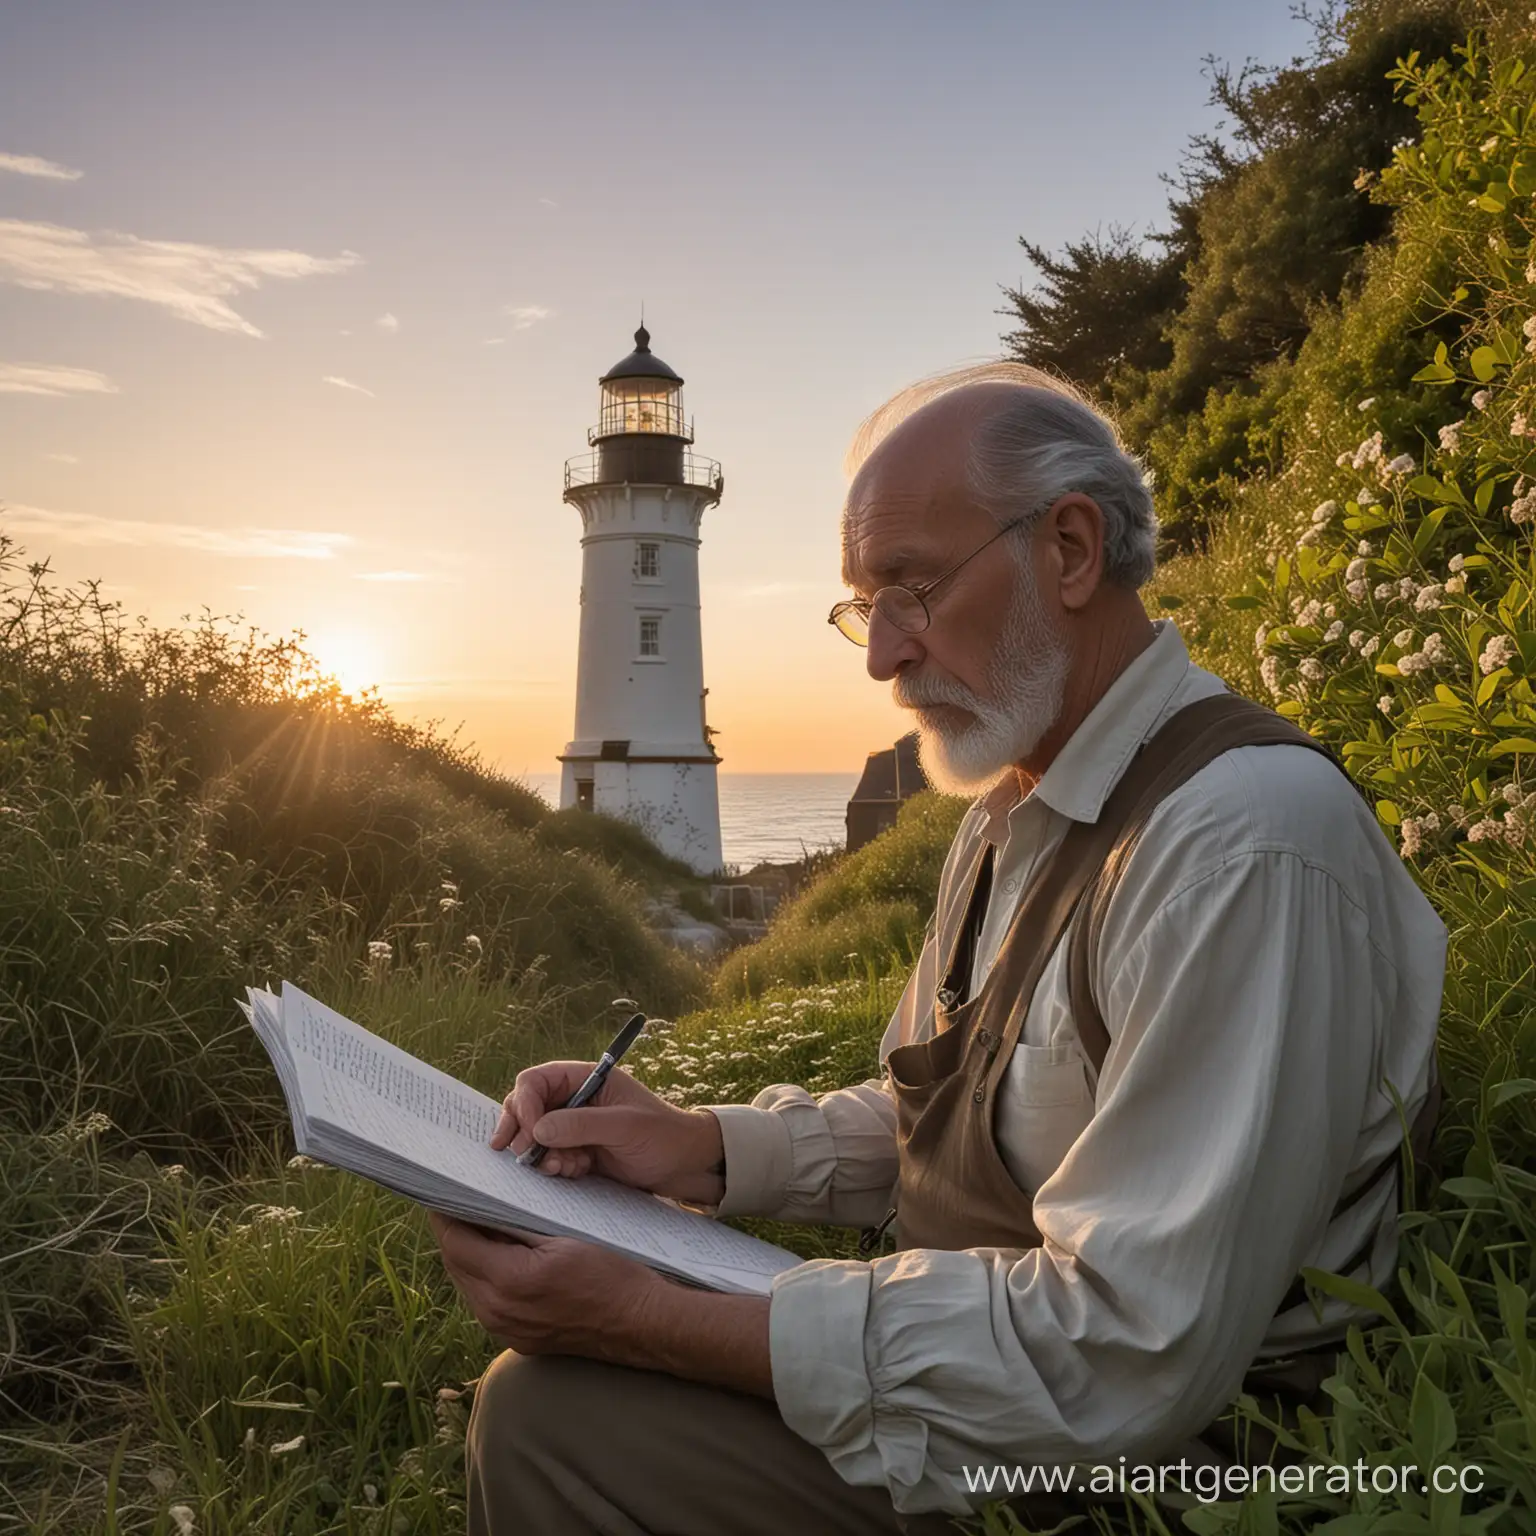 Beneath the shadow of an ancient lighthouse, an 'egghead' with pronounced sideburns pores over his notes on local flora and fauna. His focus is unbreakable, even as the daybreak illuminates the never-ending horizon before him.
